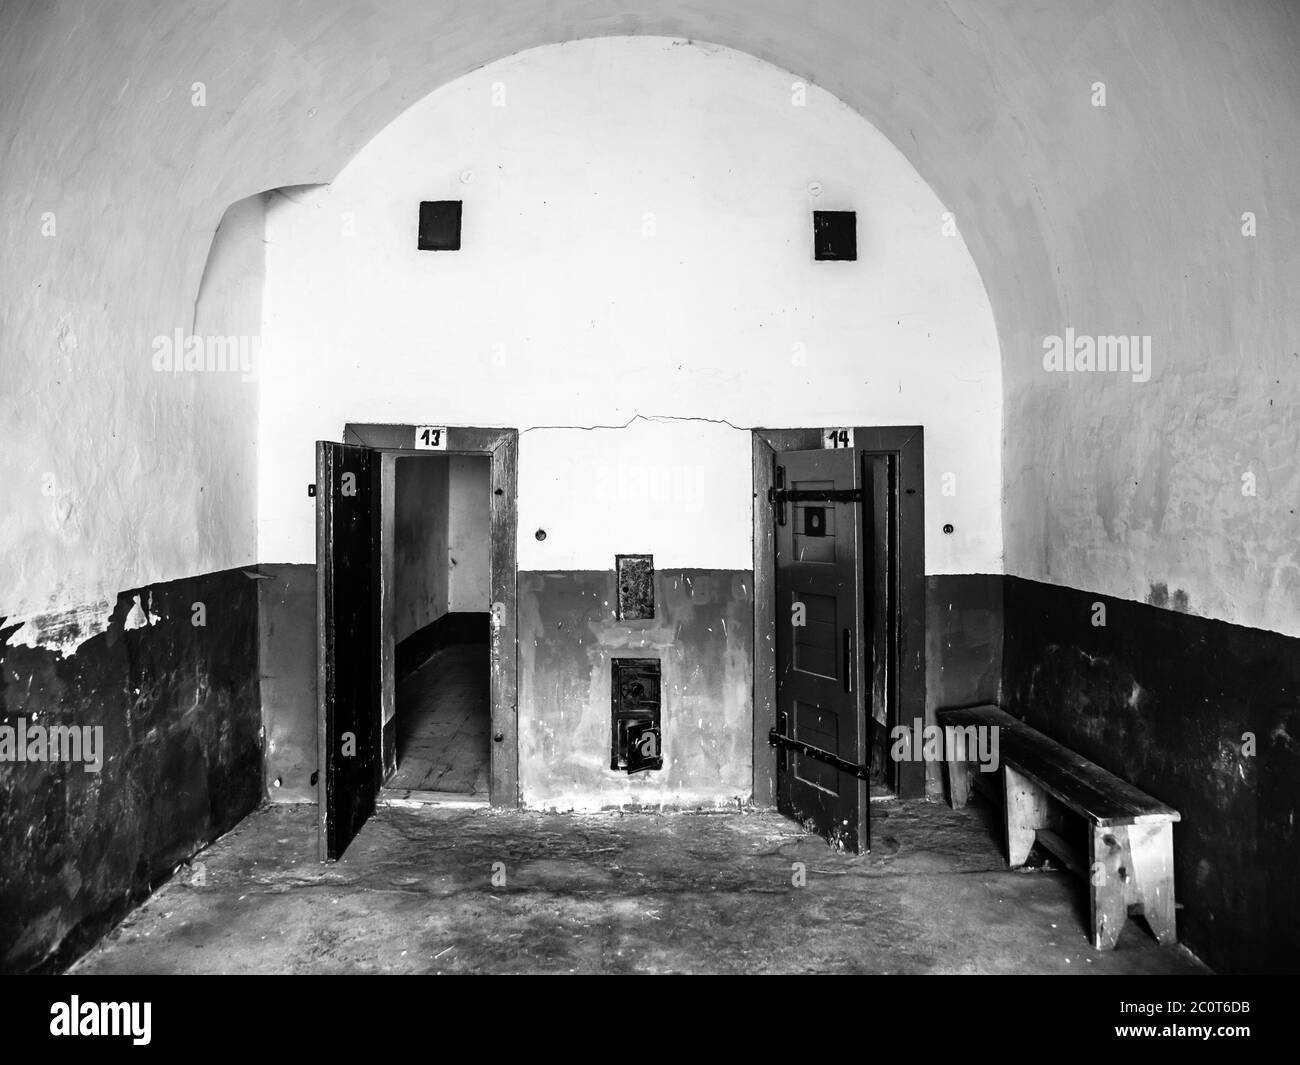 Two old prison cells with wooden door. View from corridor. Black and white image. Stock Photo